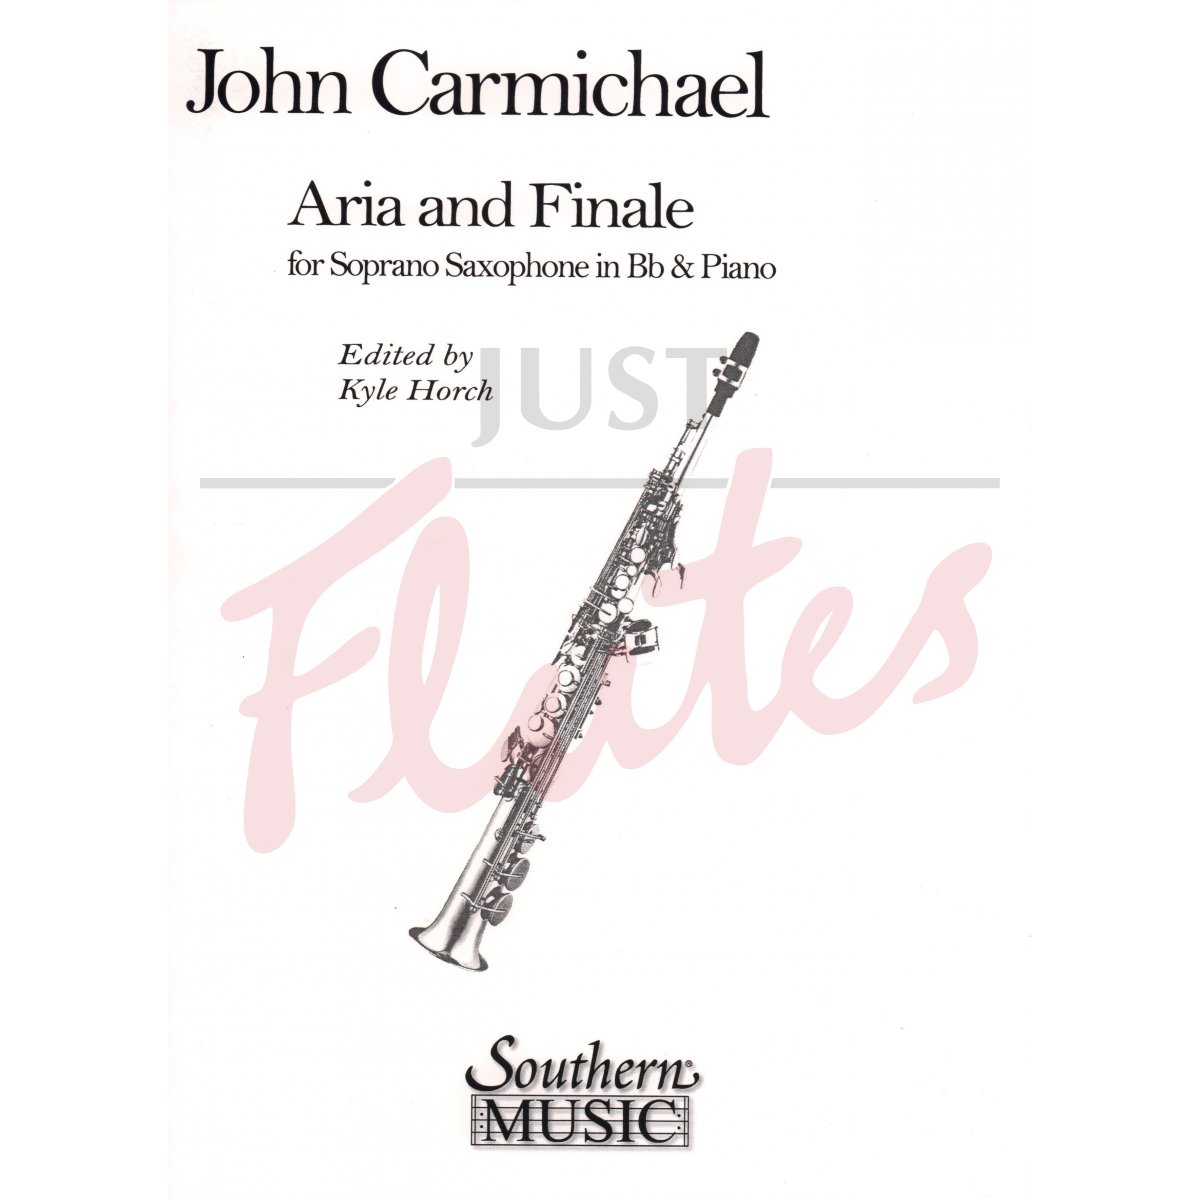 Aria and Finale for Soprano Saxophone and Piano